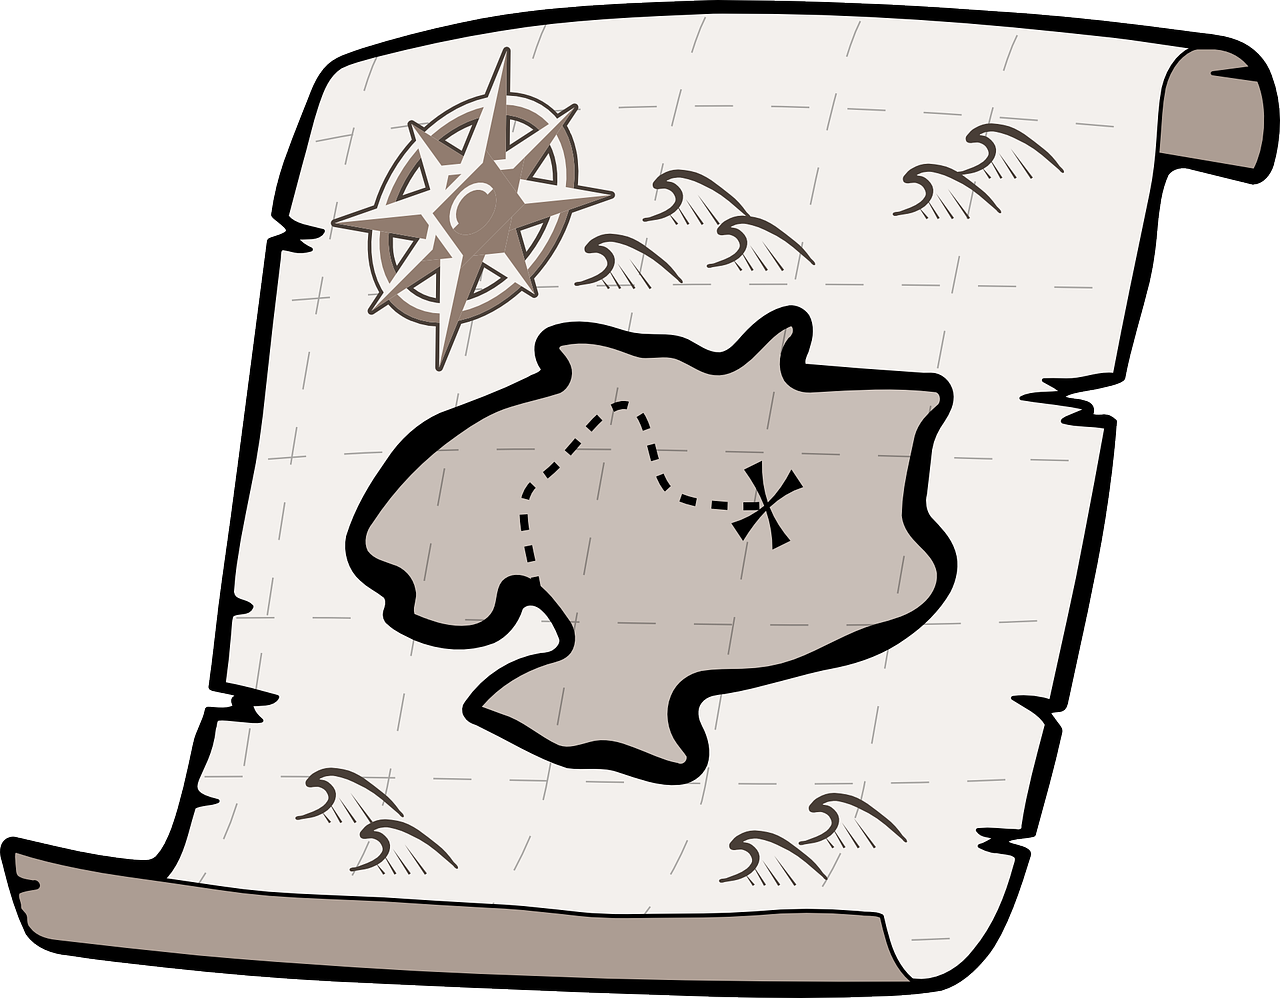 Clip art of a treasure map with an island and an X on it. The compass rose is on the top left. Waves surround the island.